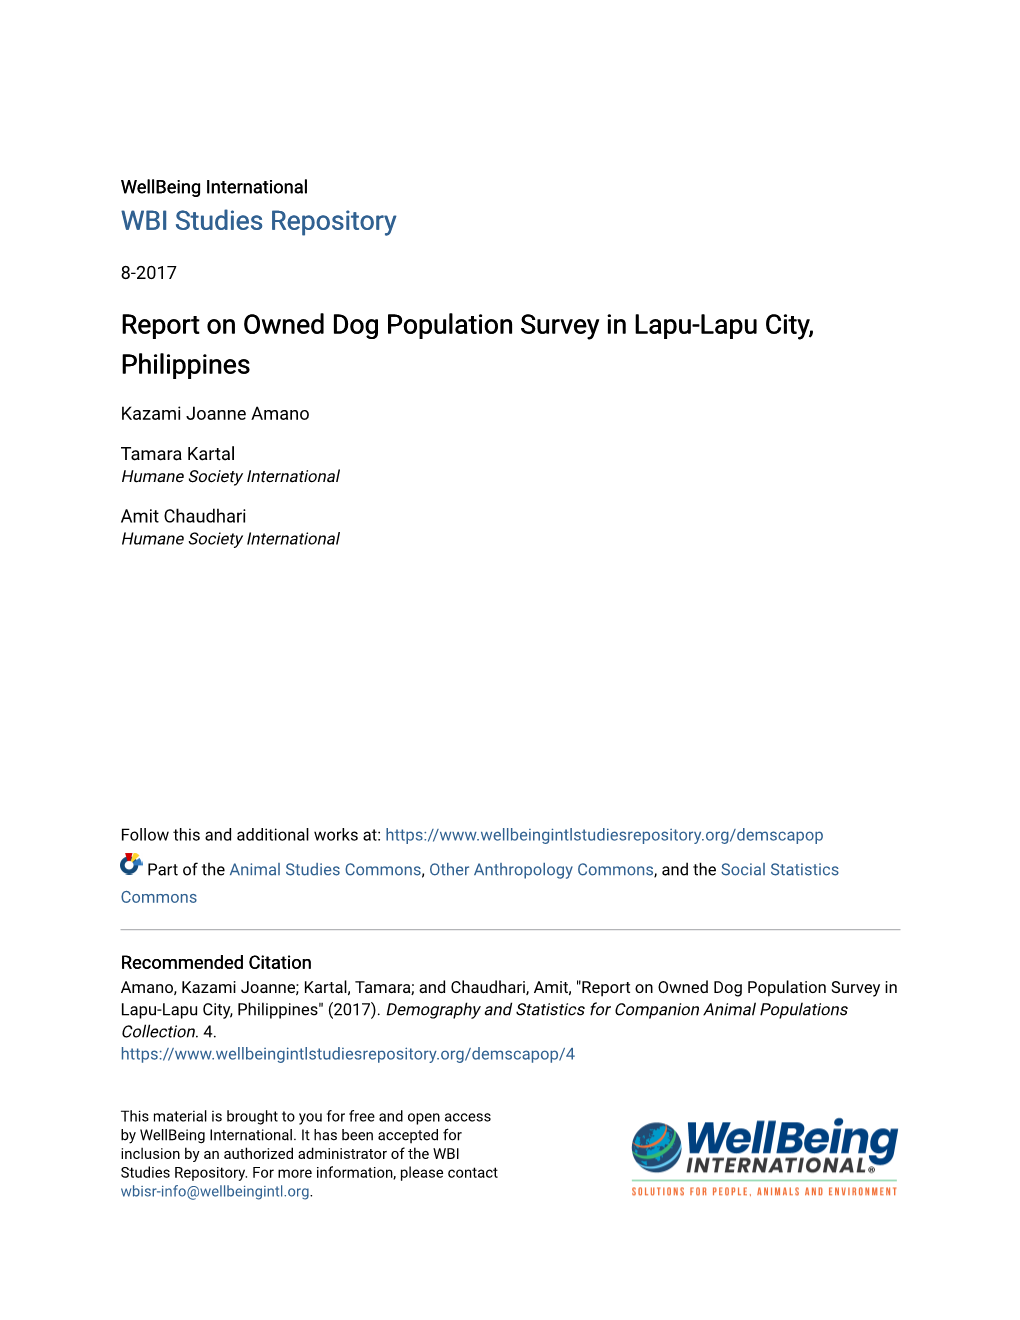 Report on Owned Dog Population Survey in Lapu-Lapu City, Philippines